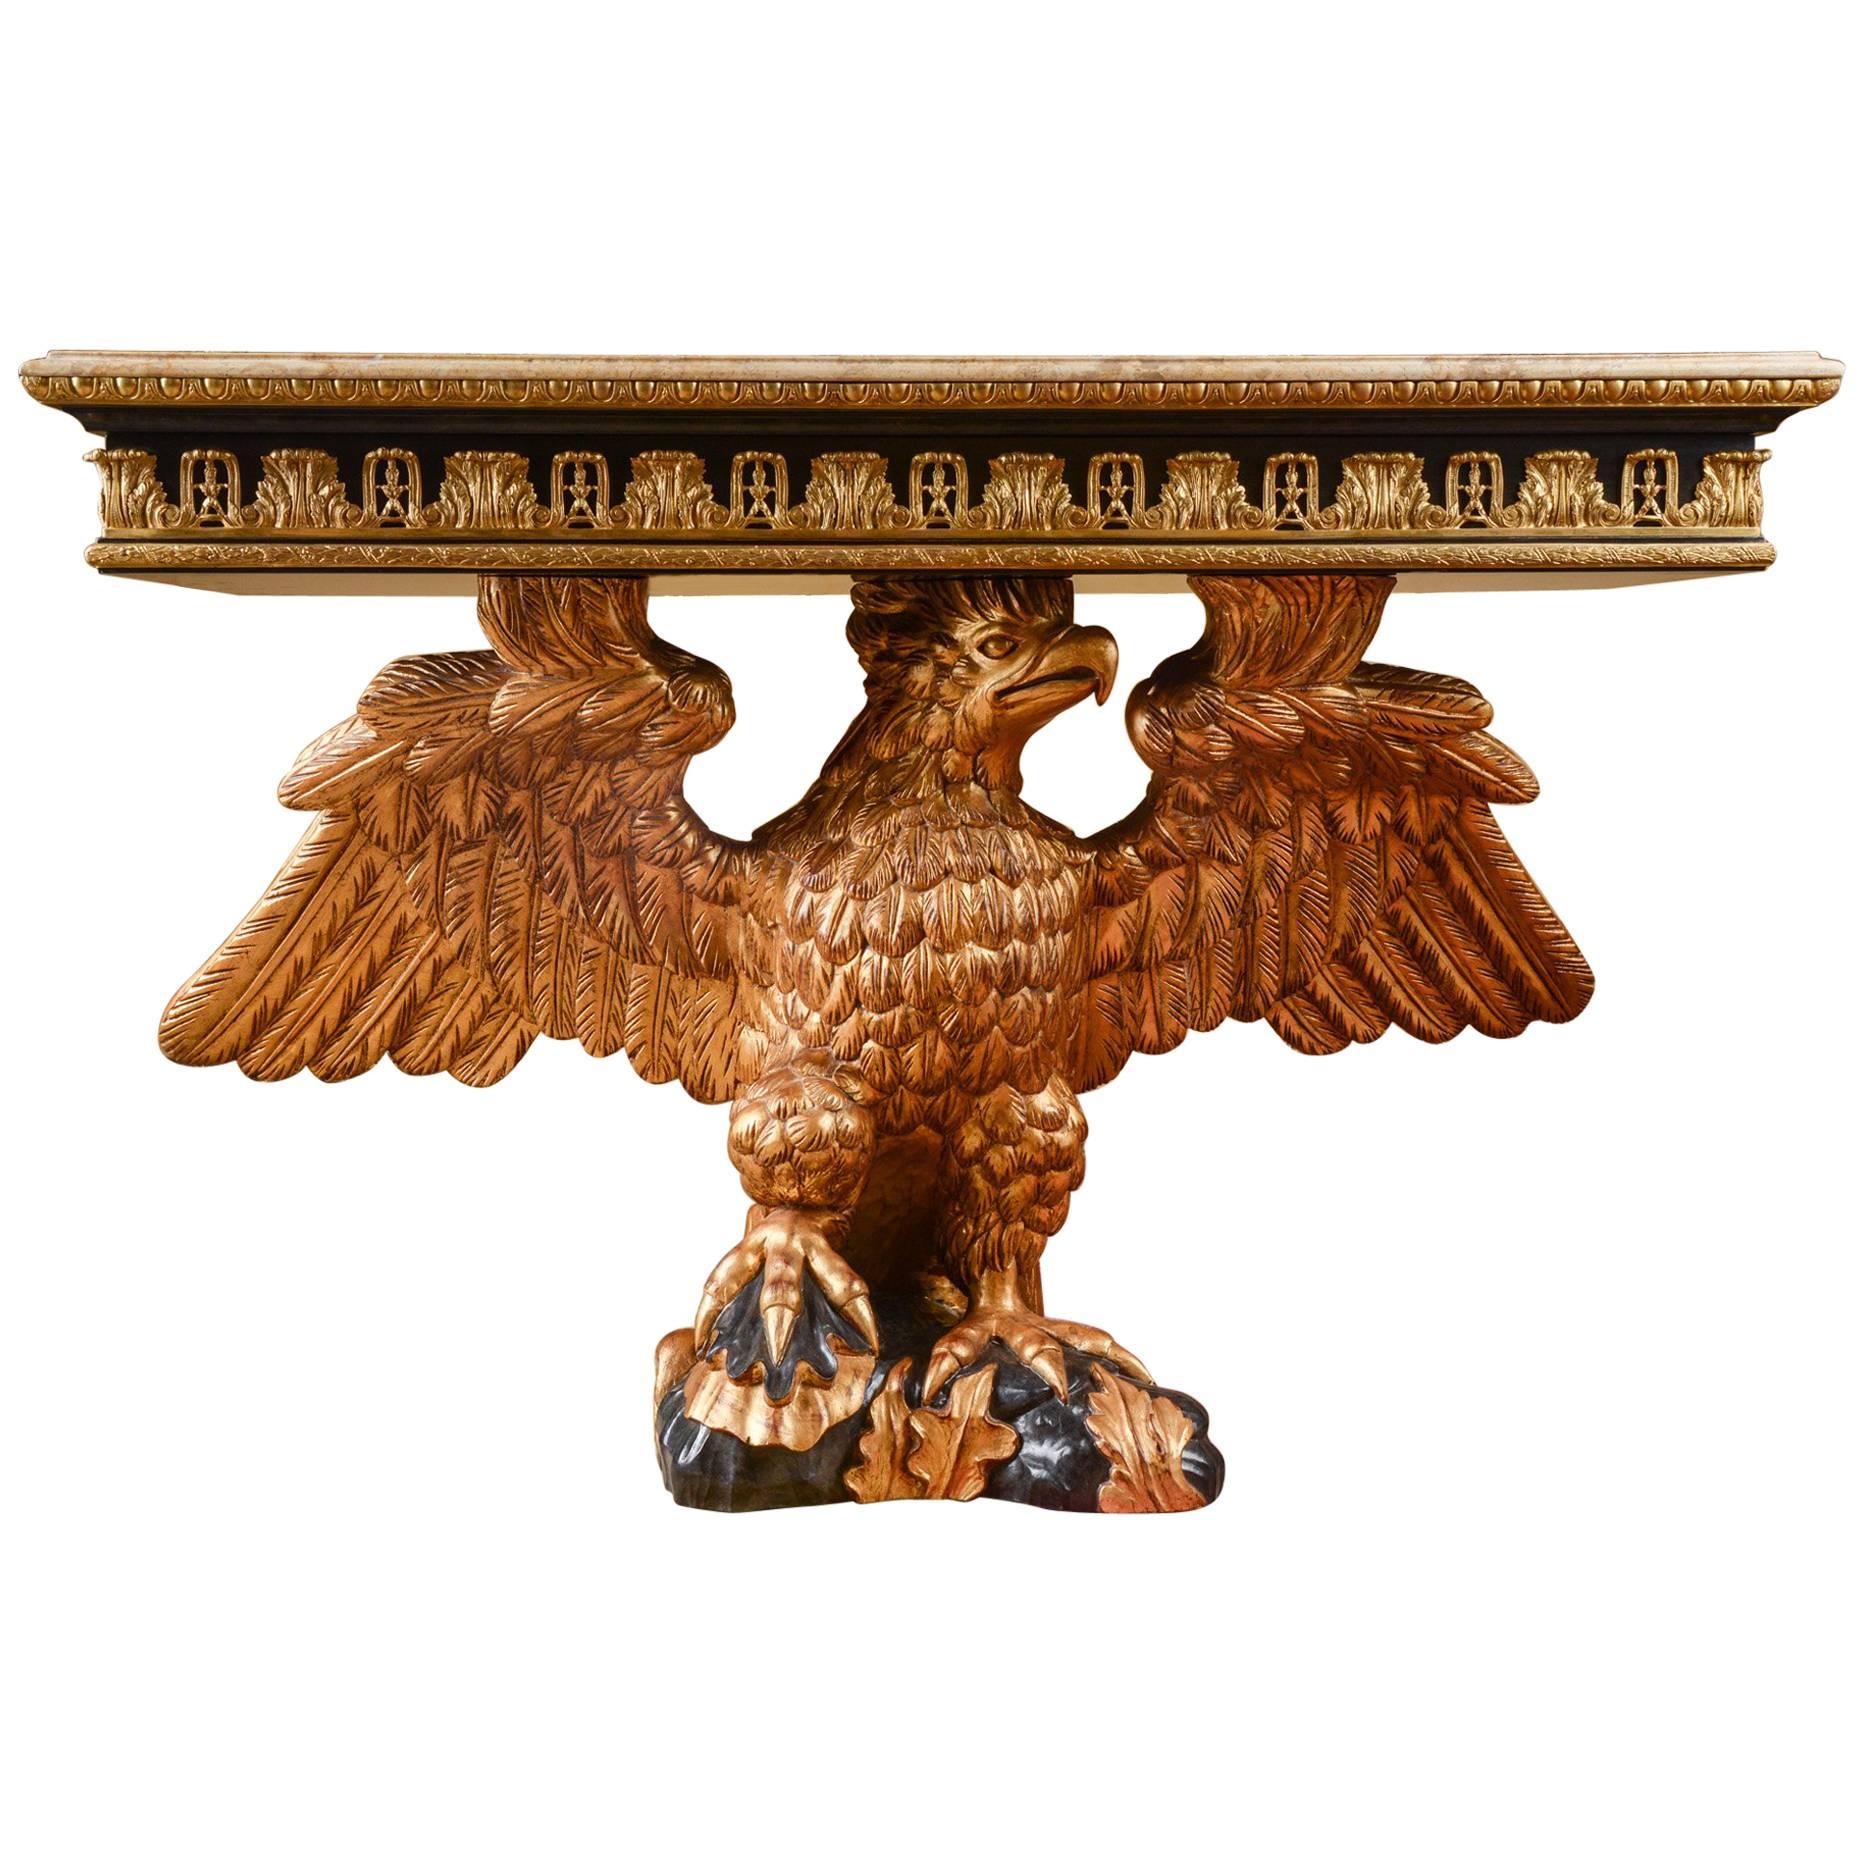 20th Century Eagle Console Table According to a Design by William Kent